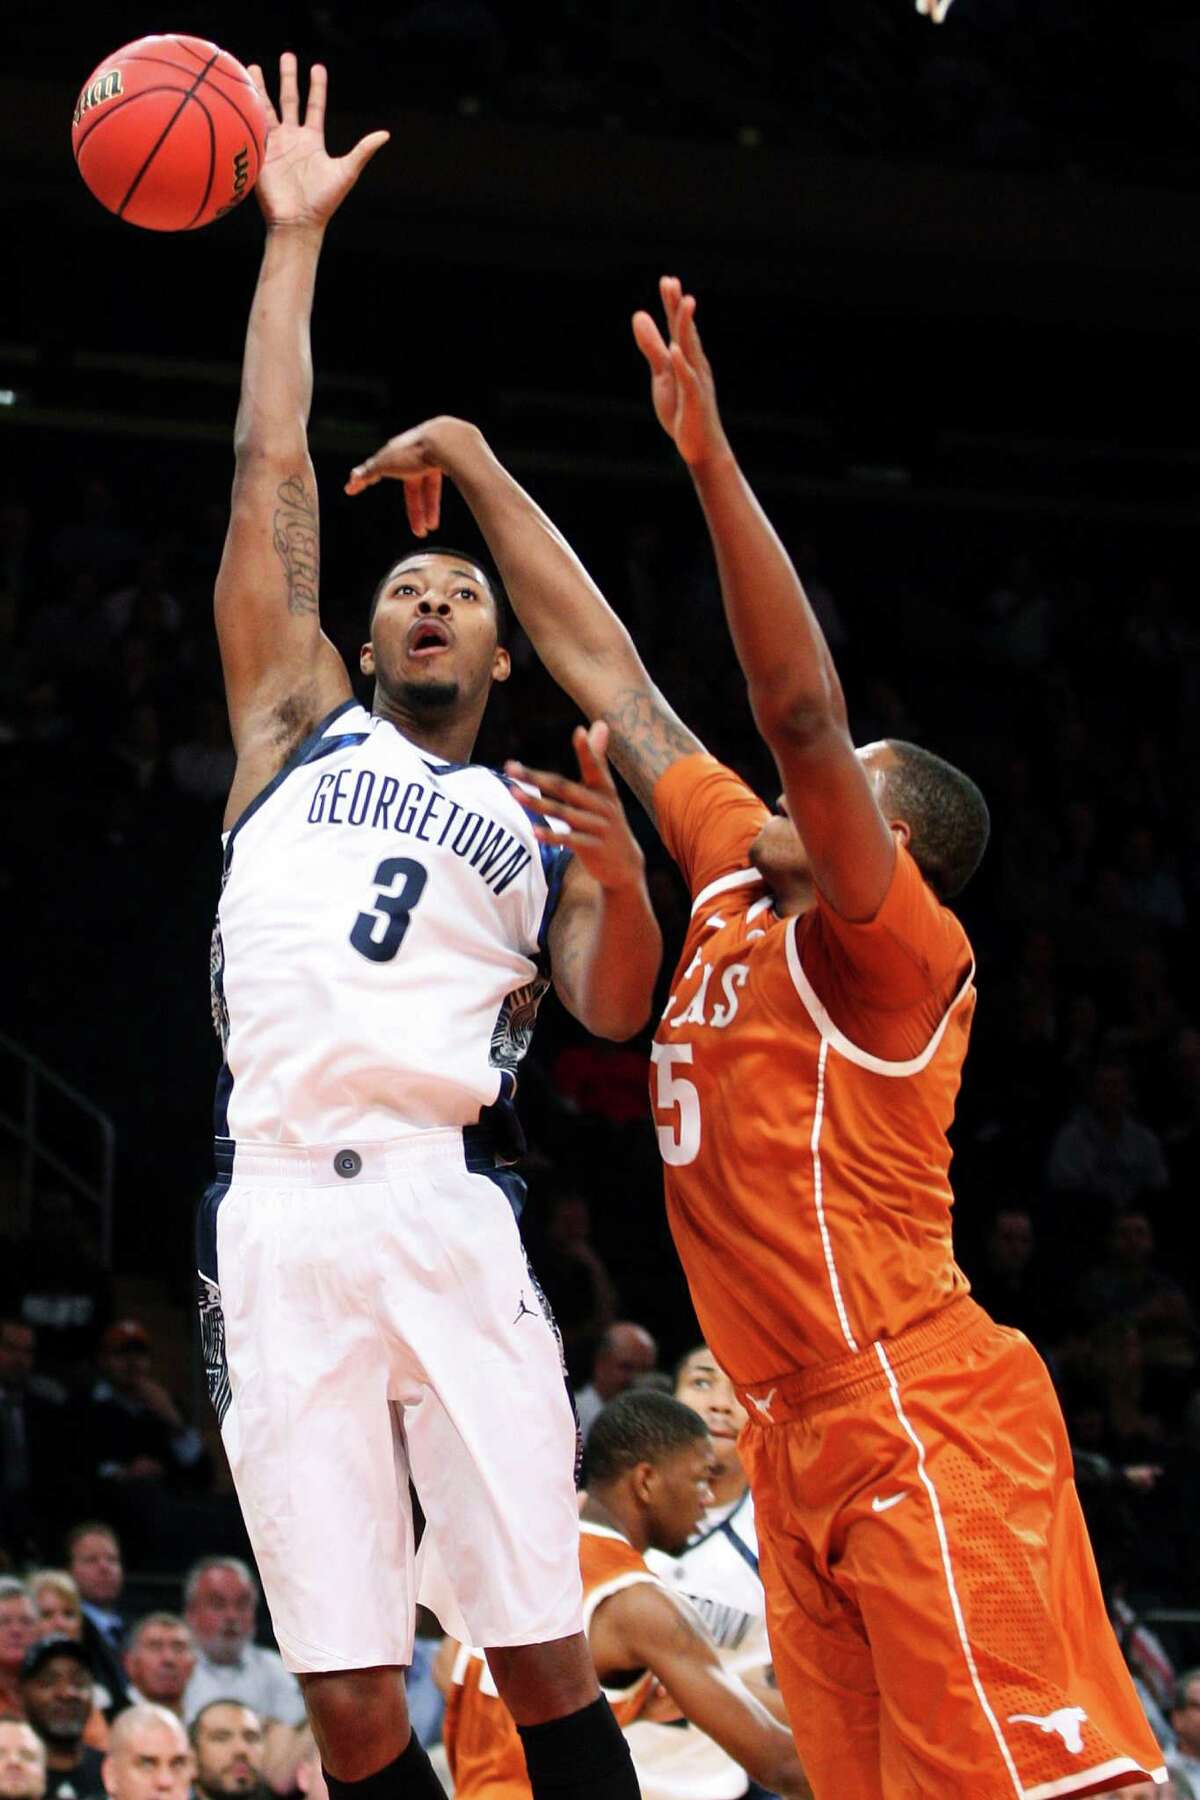 Georgetown's Mikael Hopkins (3) shoots over Texas' Cameron Ridley (55) during the first half of their NCAA college basketball game in the Jimmy V Classic, Tuesday, Dec. 4, 2012, at Madison Square Garden in New York. (AP Photo/Frank Franklin II)